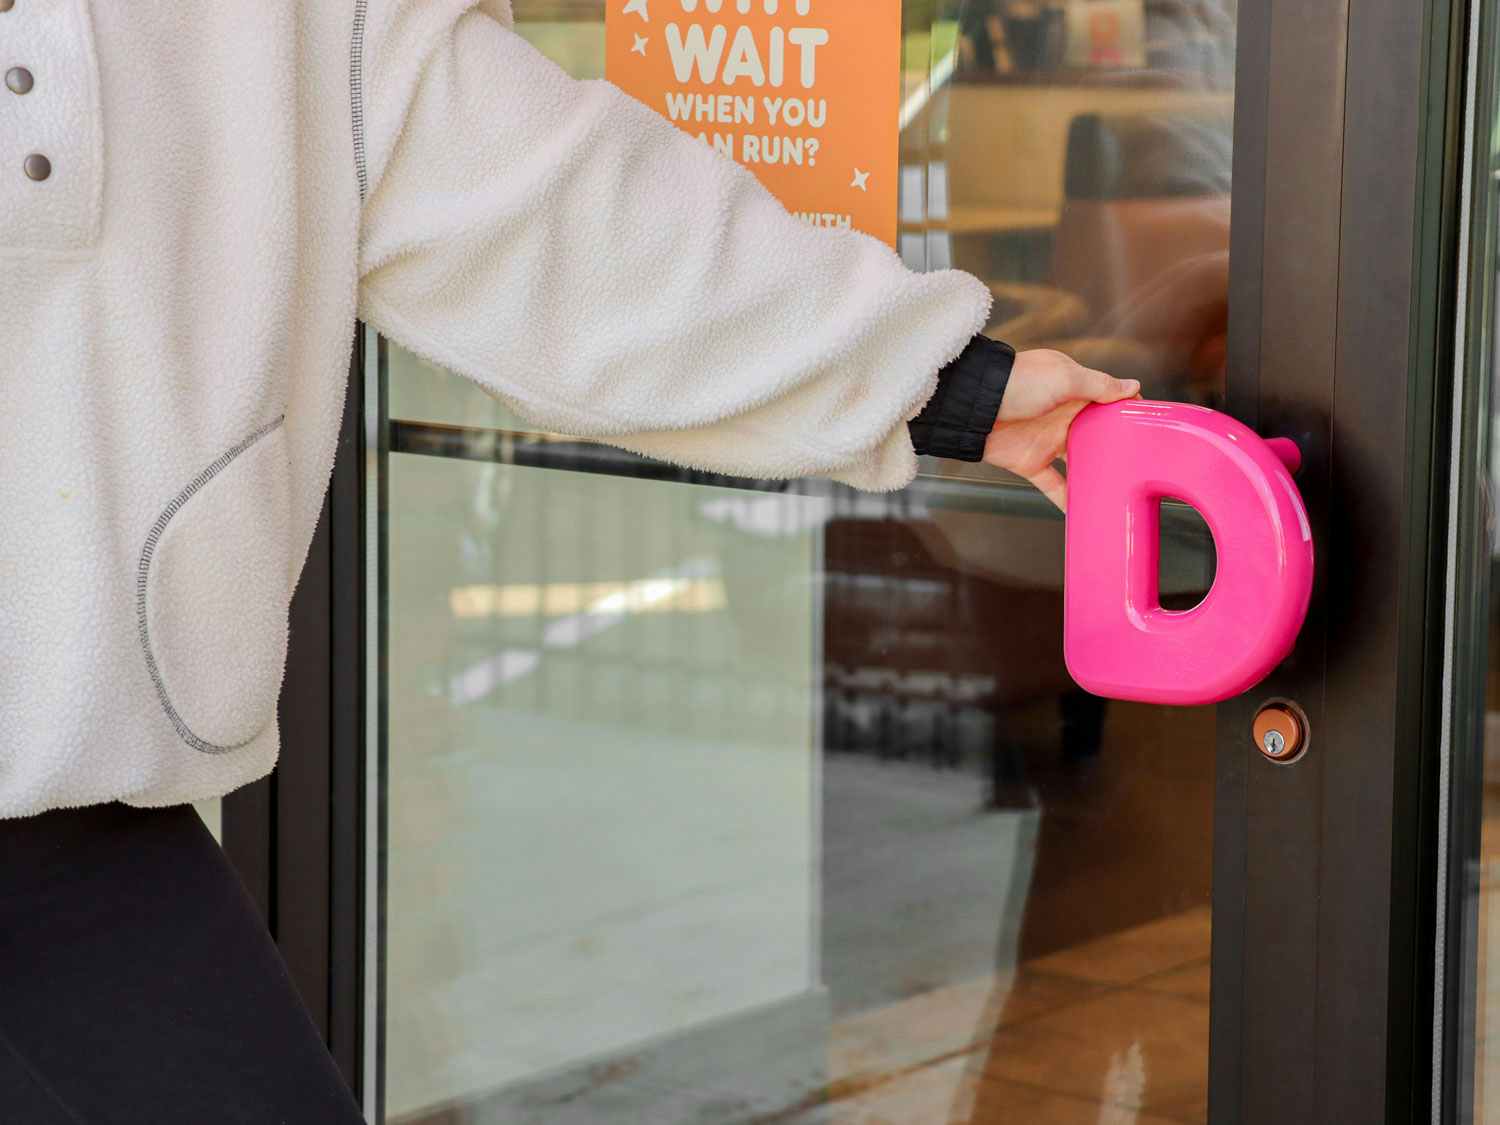 a person entering a dunkin donuts